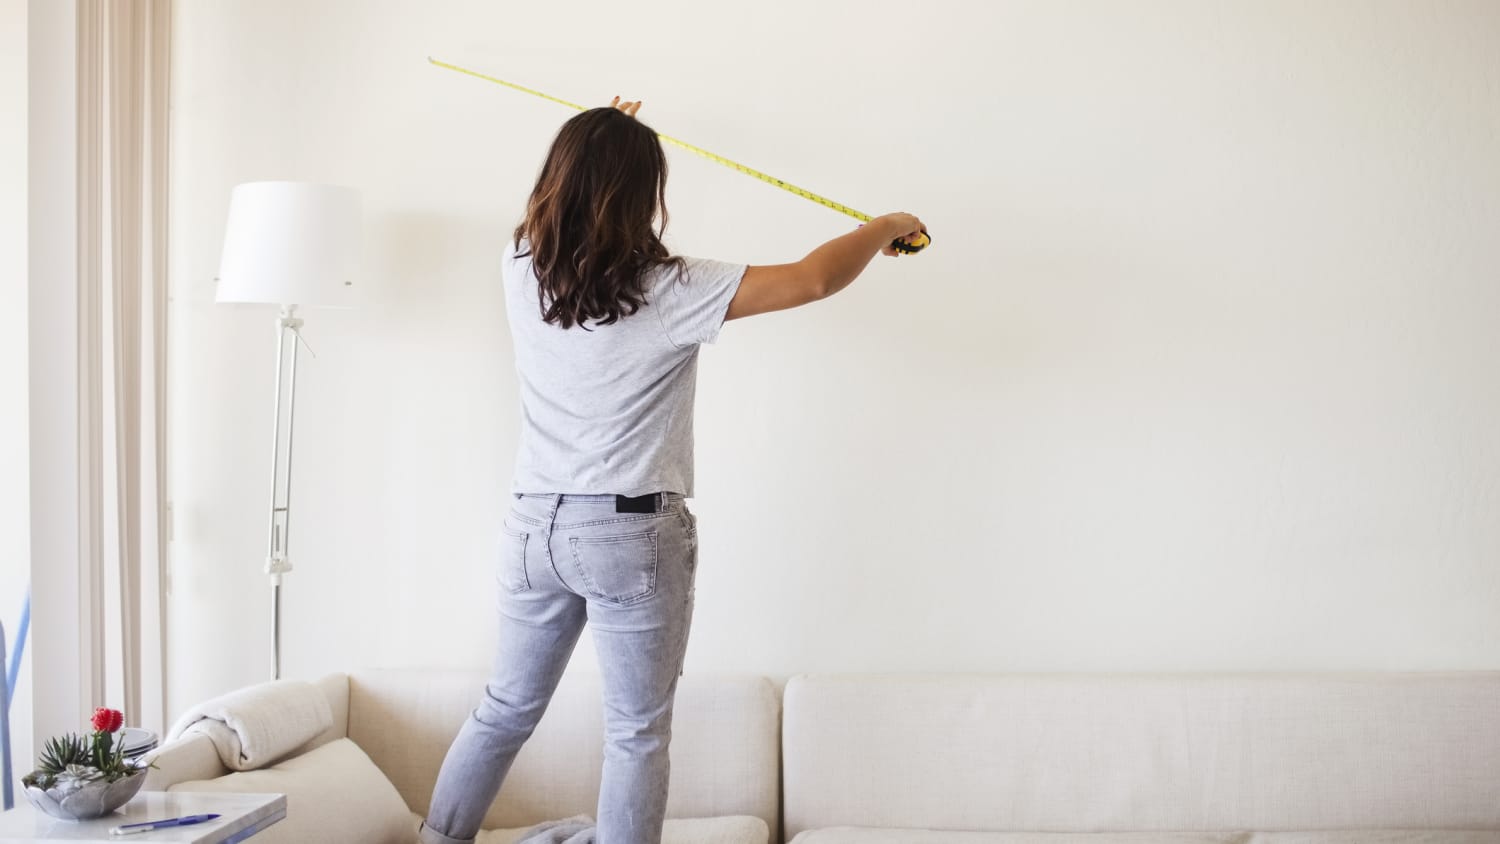 My Go-To Painting Tools - Rooms For Rent blog